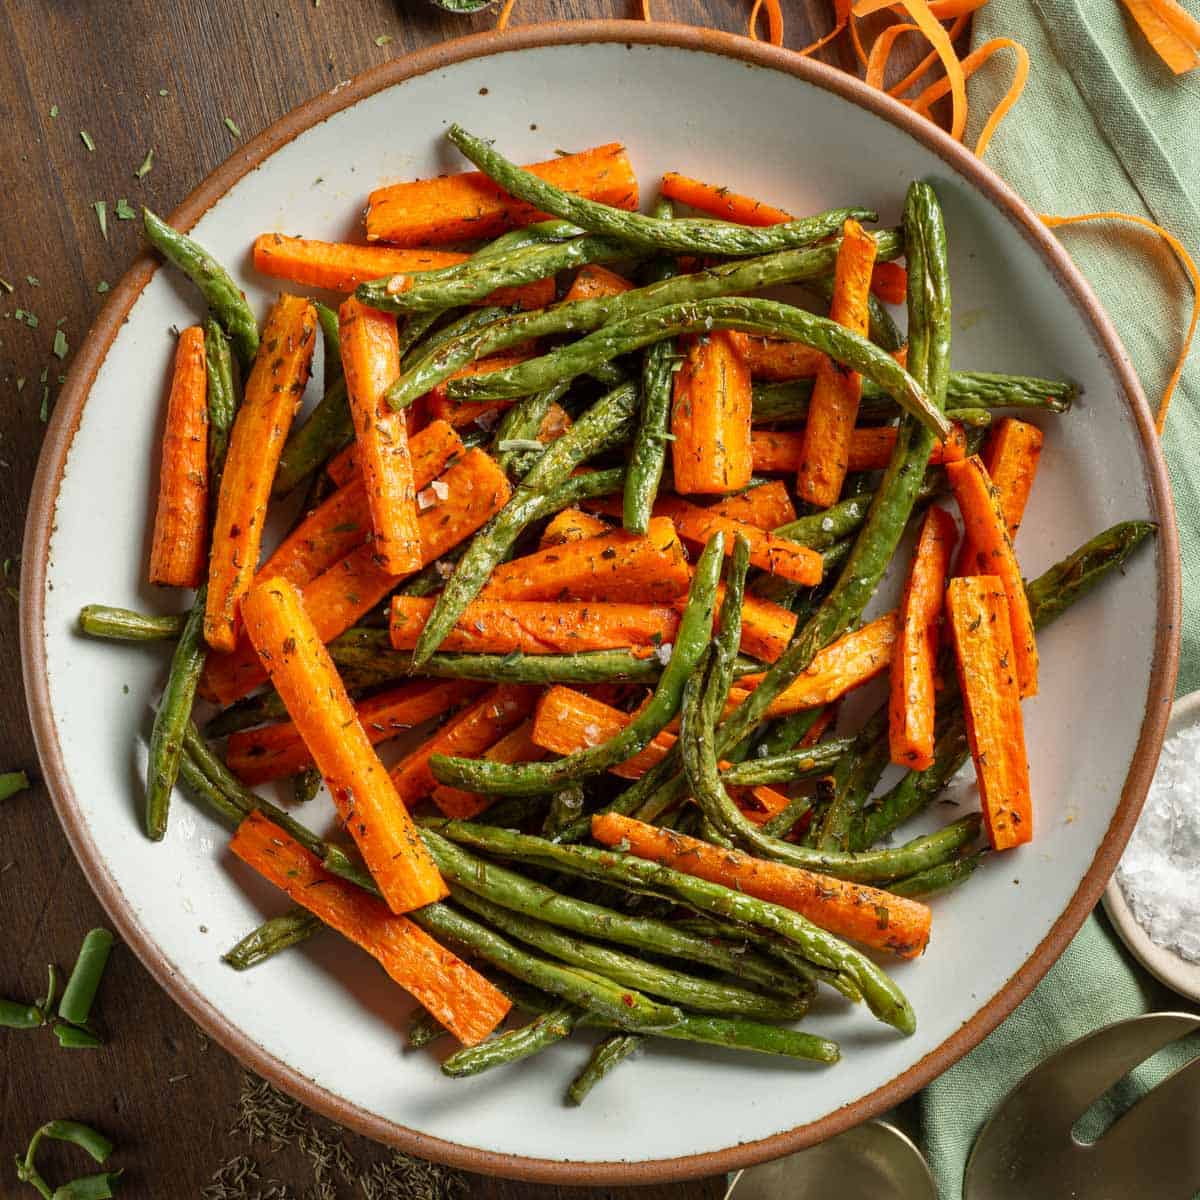 Roasted carrots and green beans topped with spices in a serving bowl.